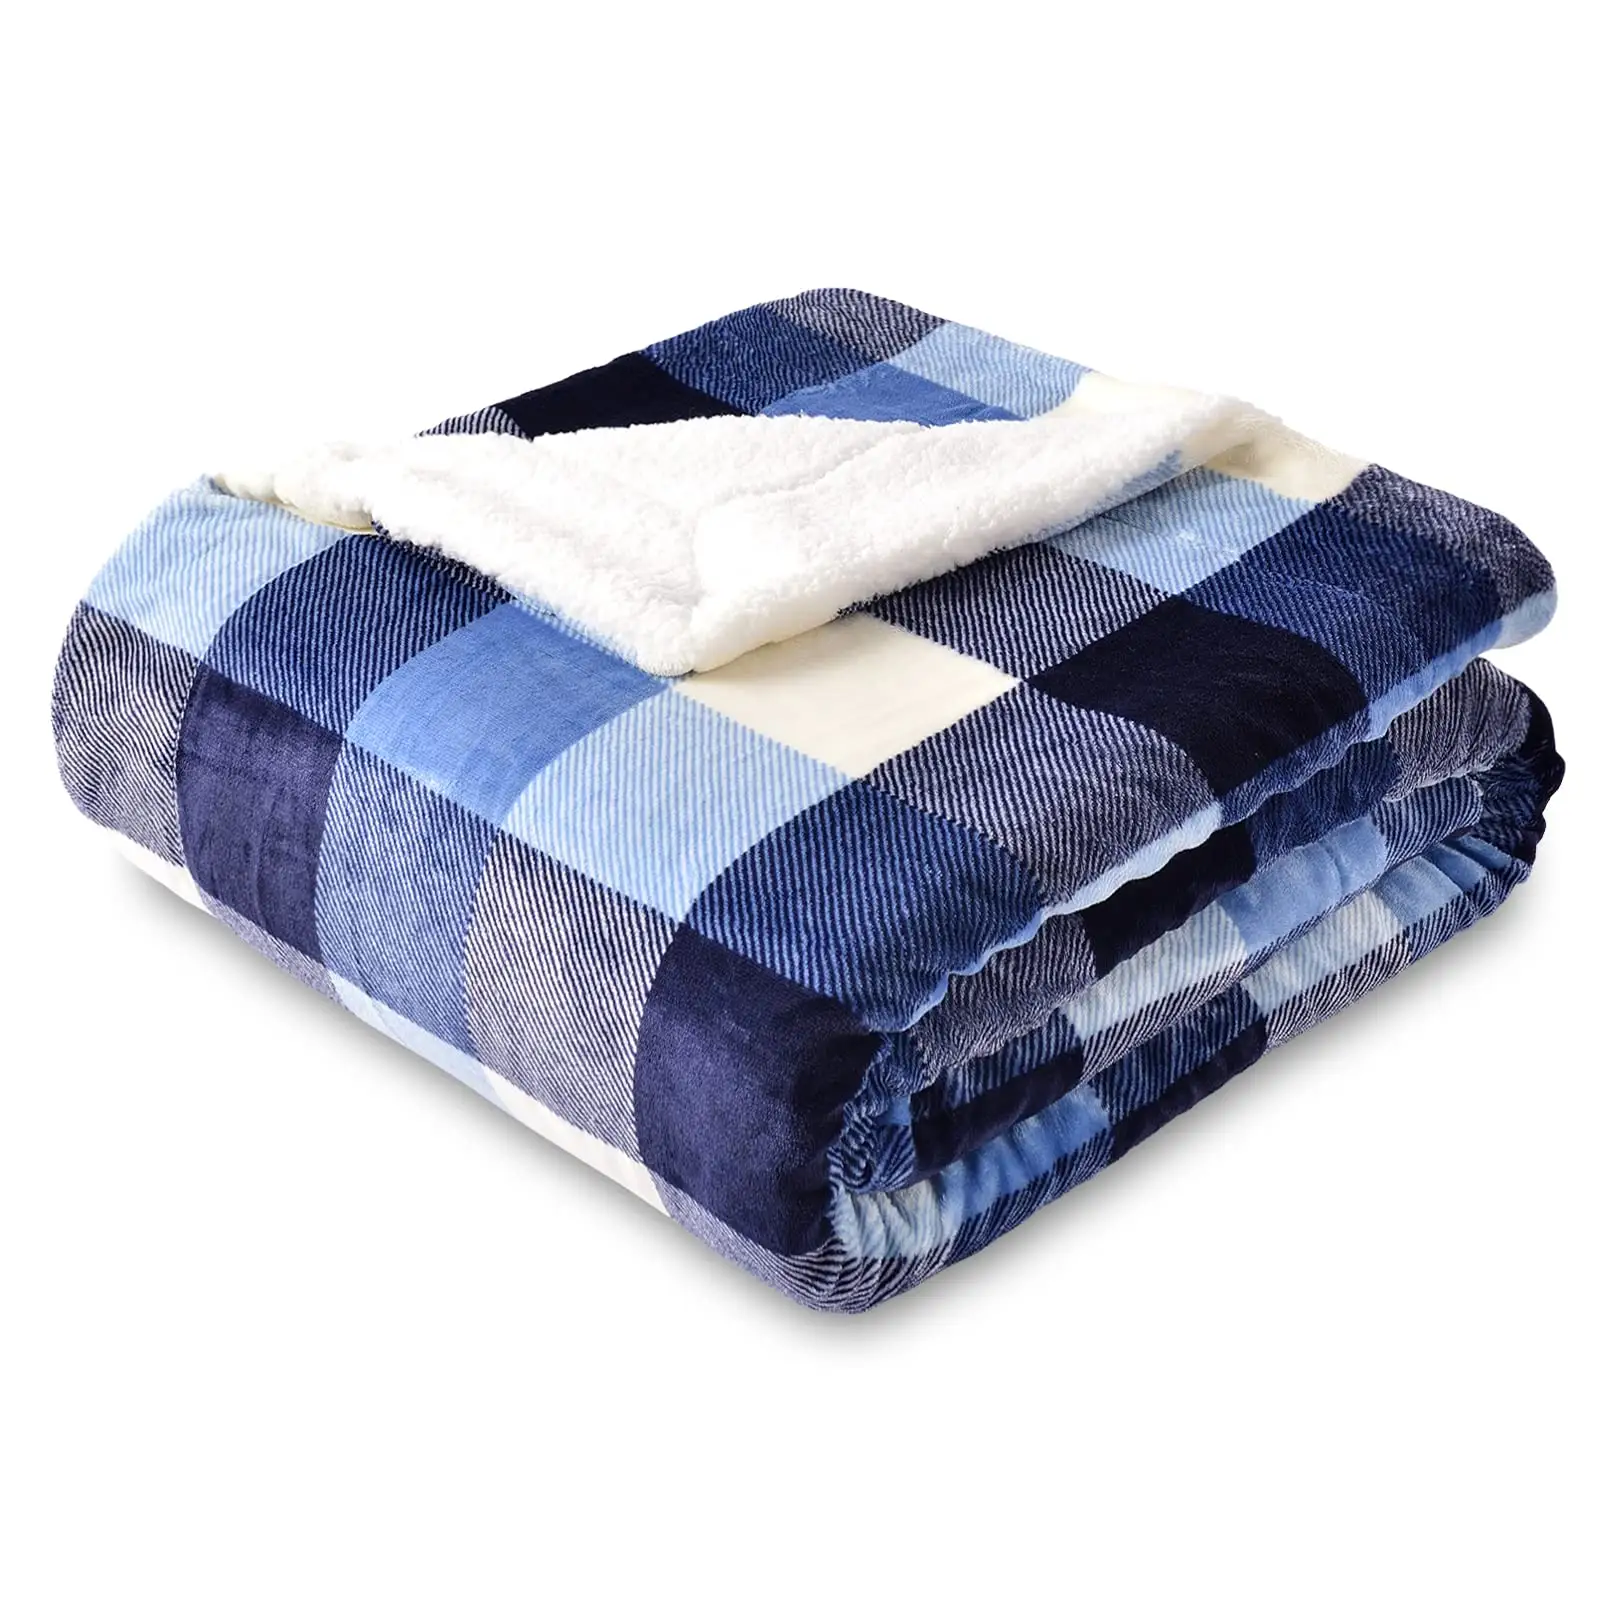 Checkered Super Soft Bedding Blanket Blue White Double Sided Plaid Sherpa Fleece Throw Blanket